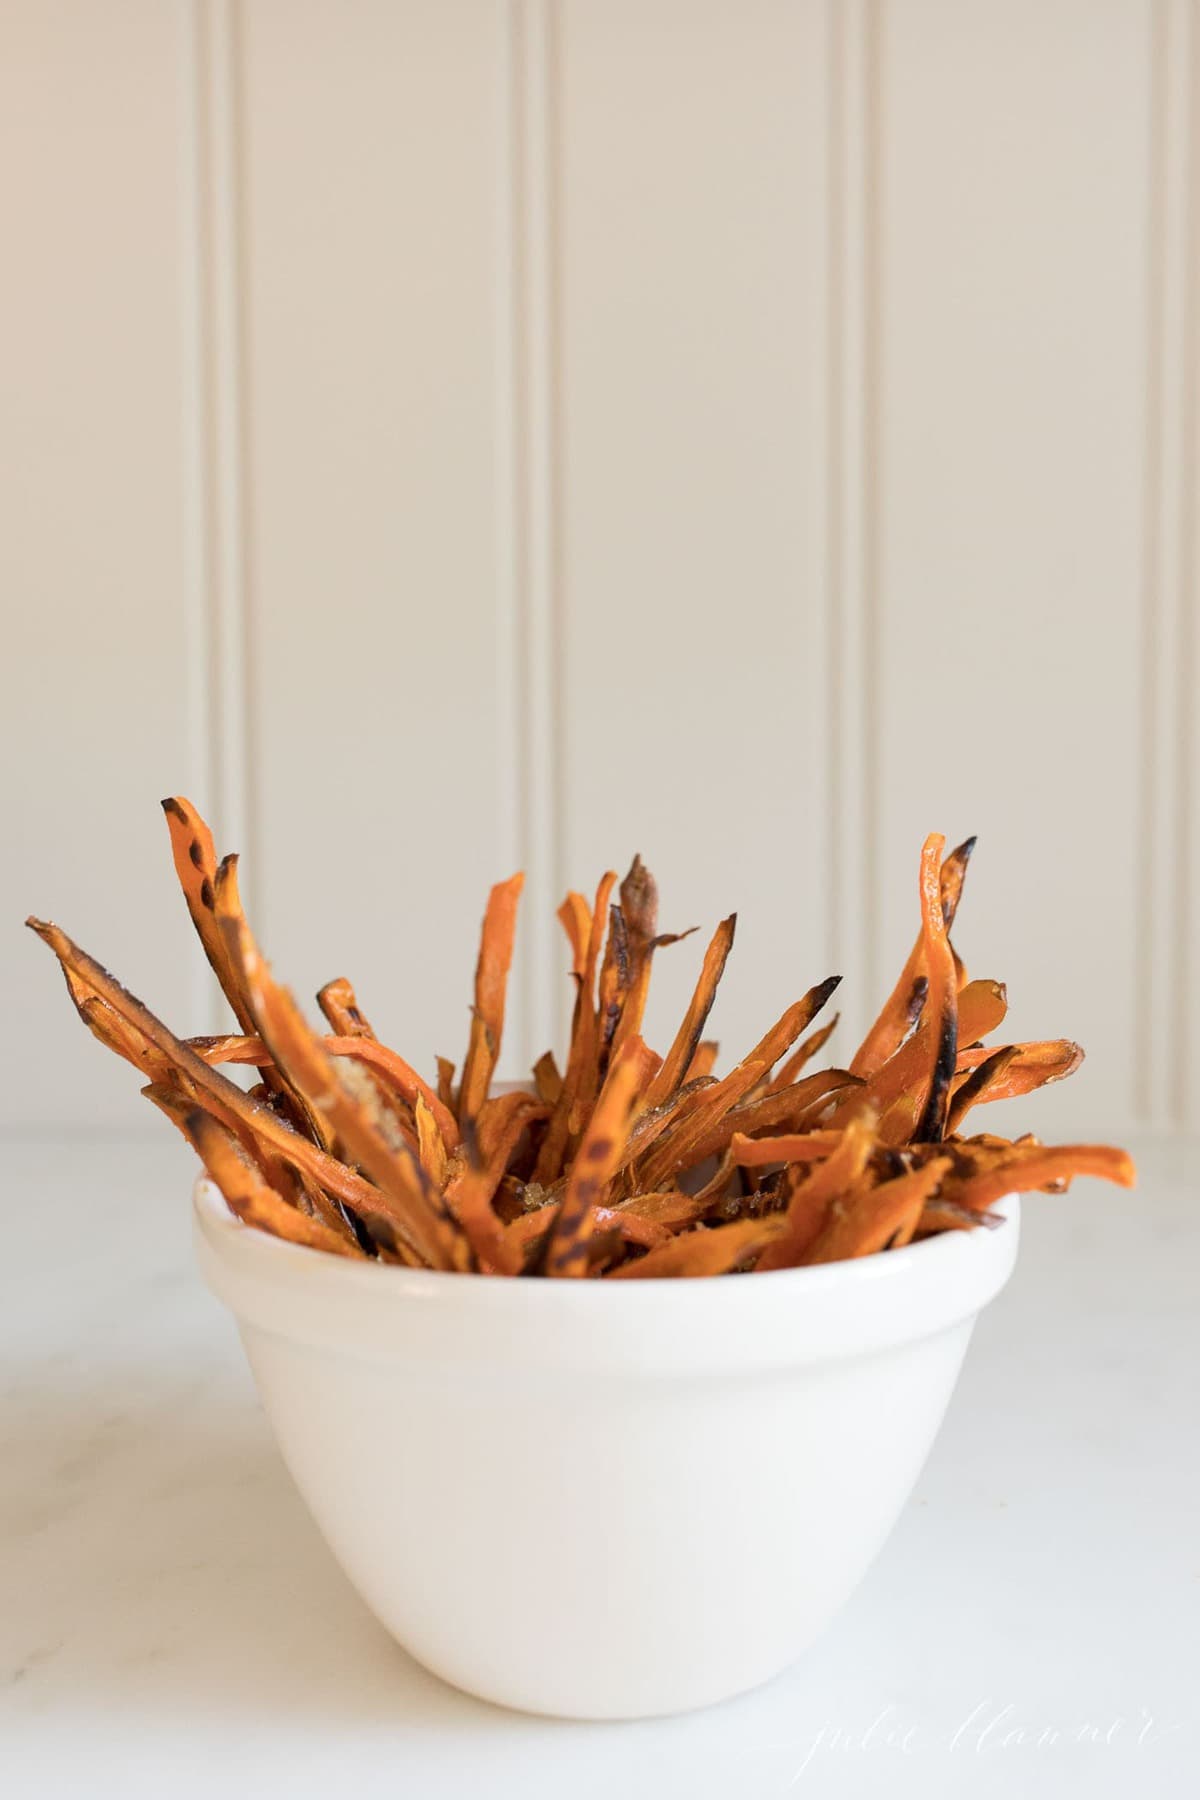 healthy sweet potato fries in a bowl